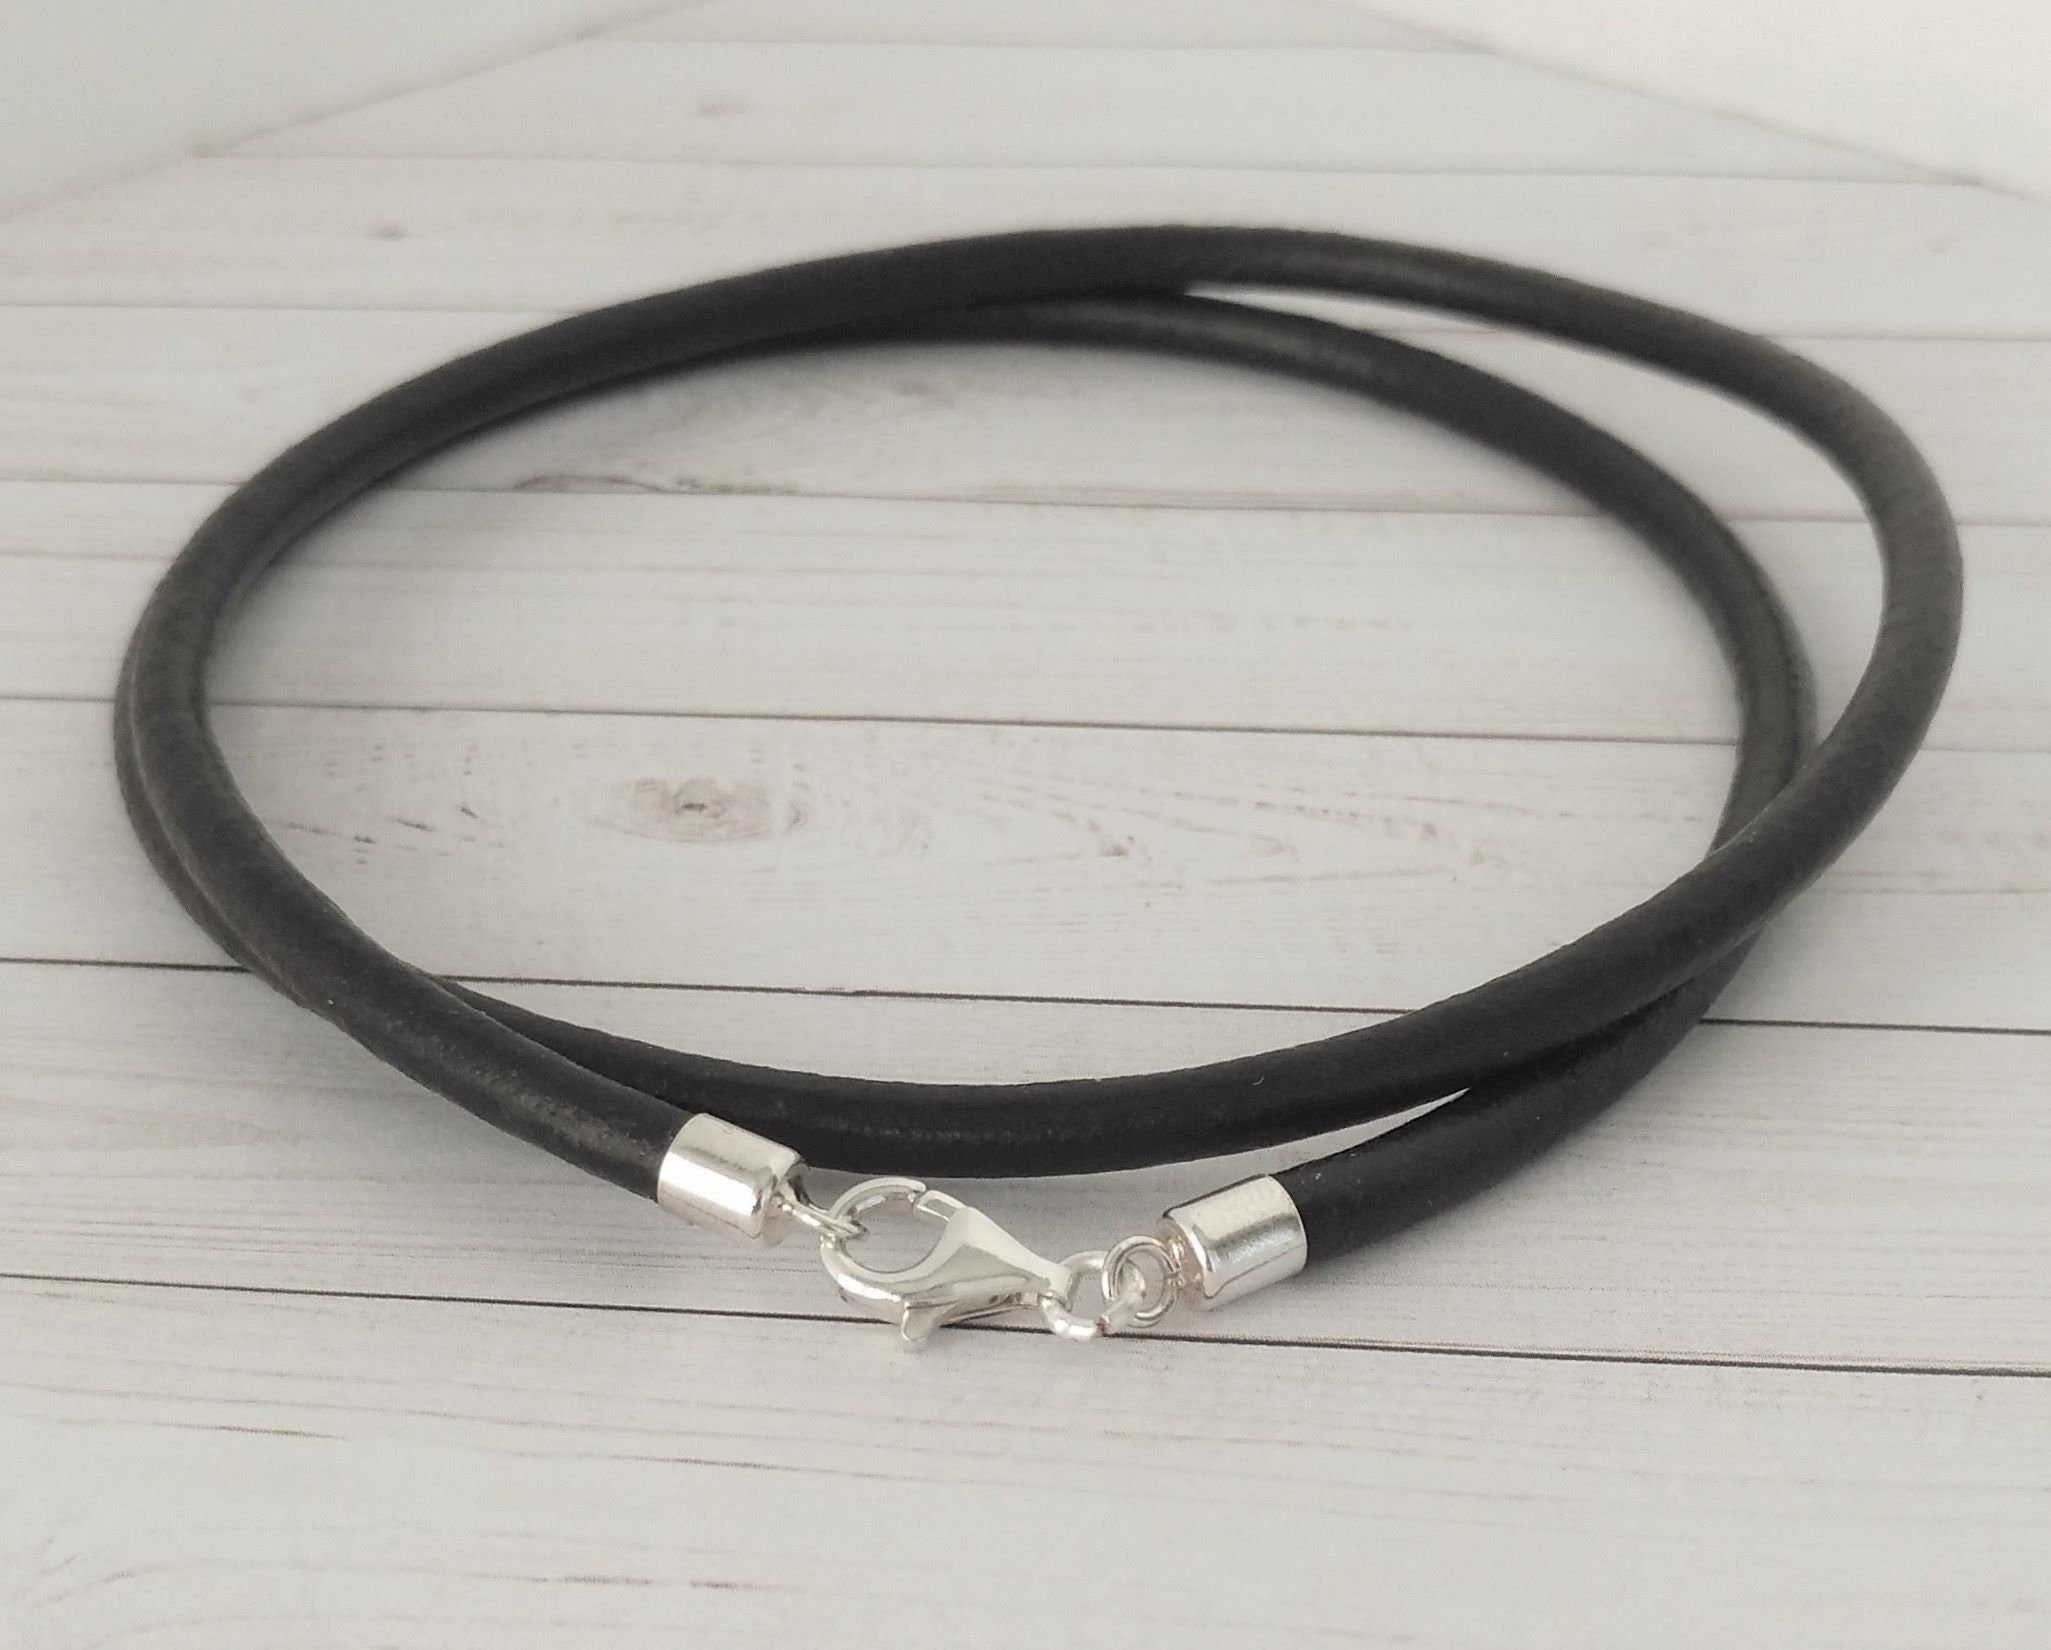 Black Leather Cord 2.0mm With Sterling Silver Clasp $35 and up